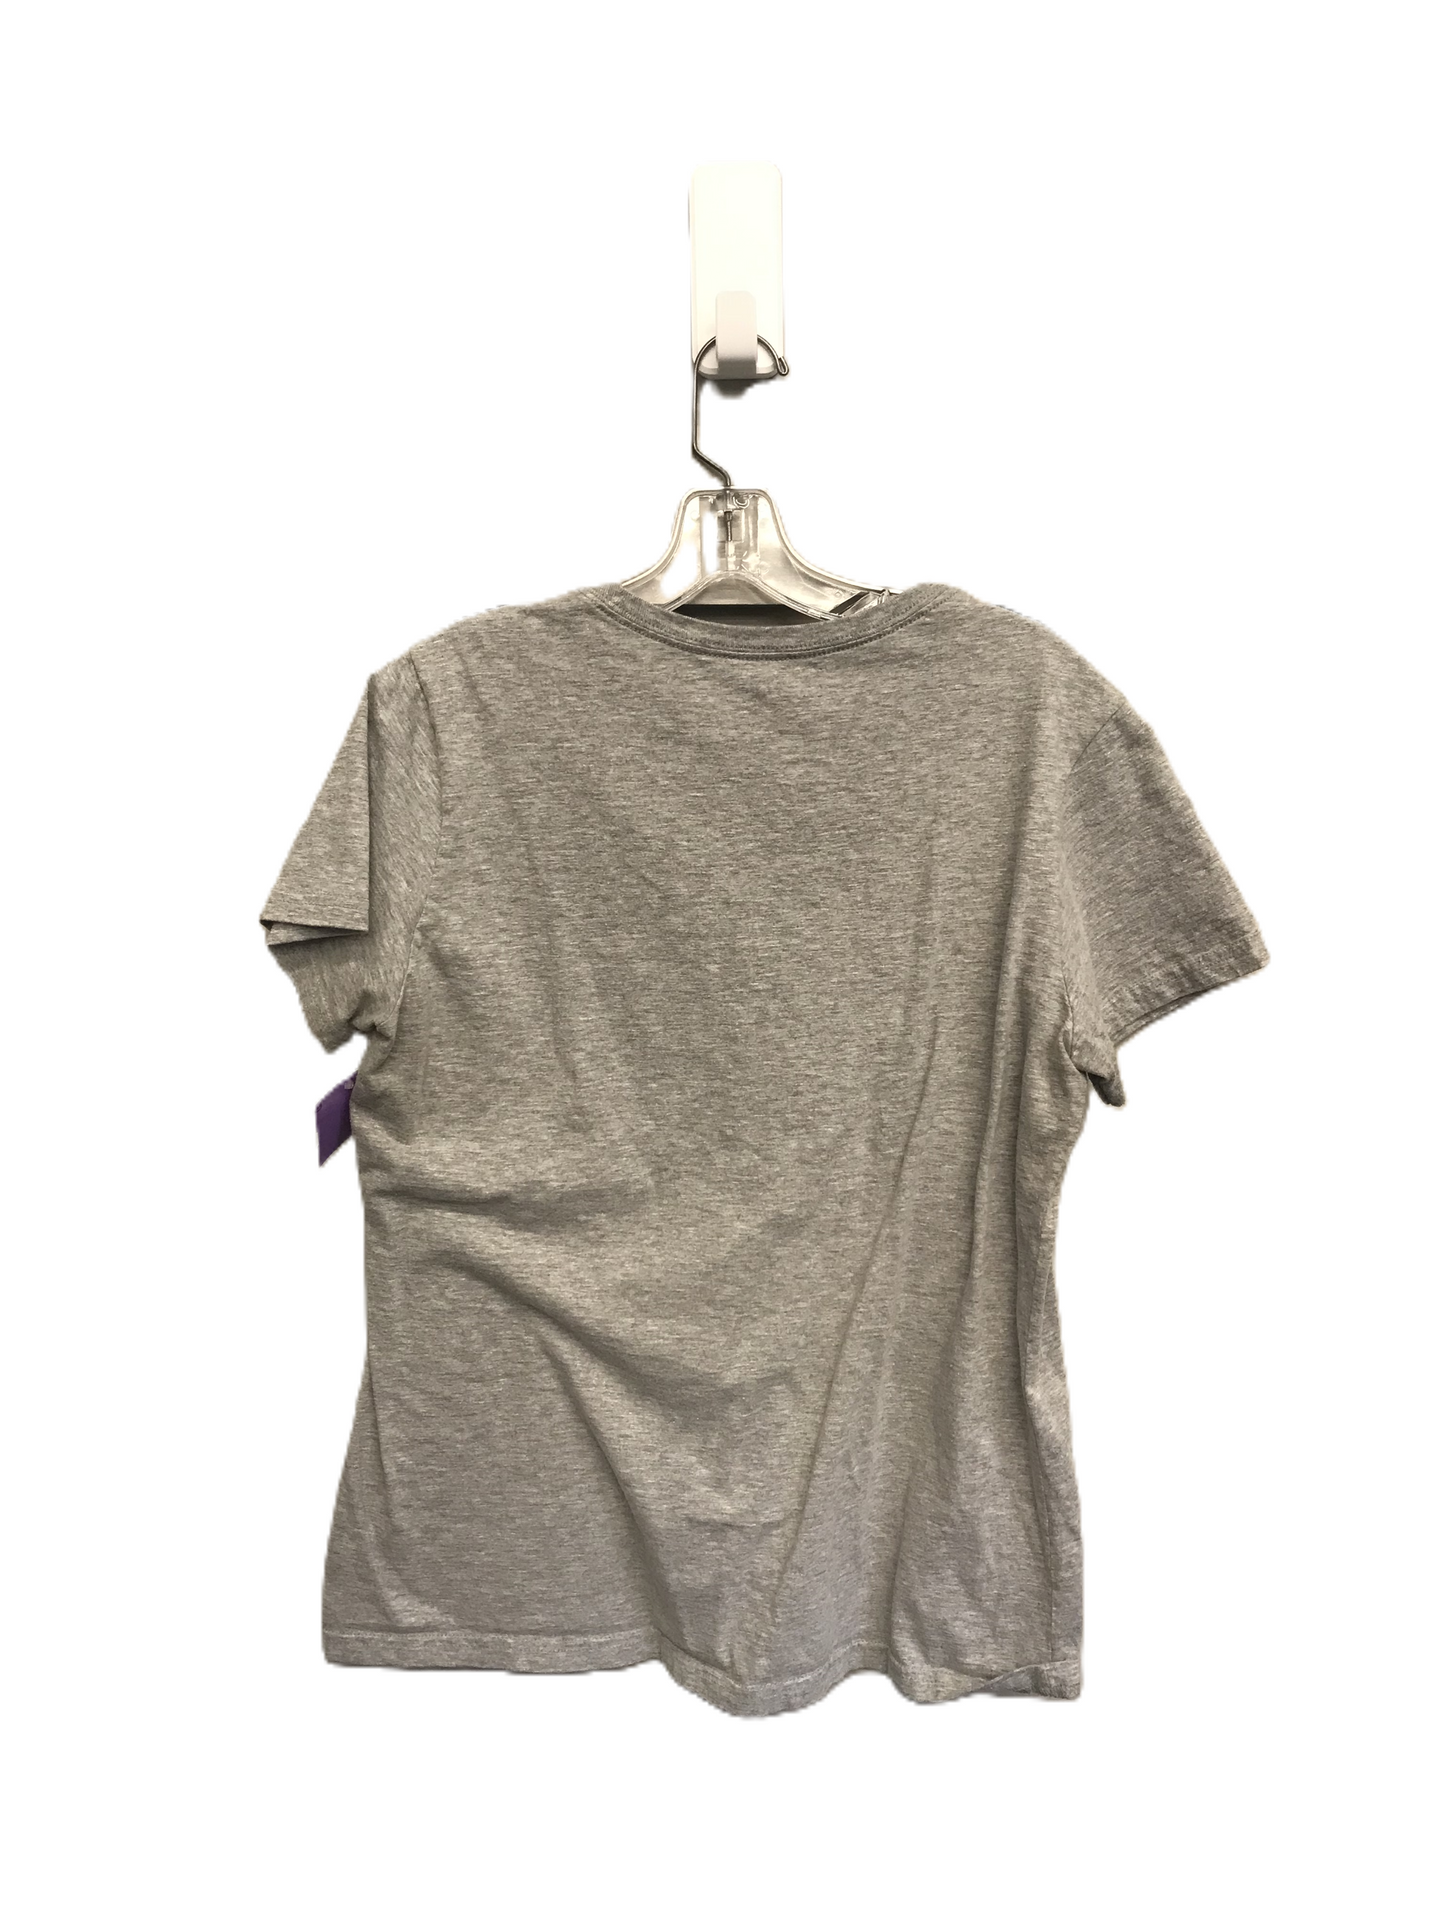 Grey Athletic Top Short Sleeve By Adidas, Size: L